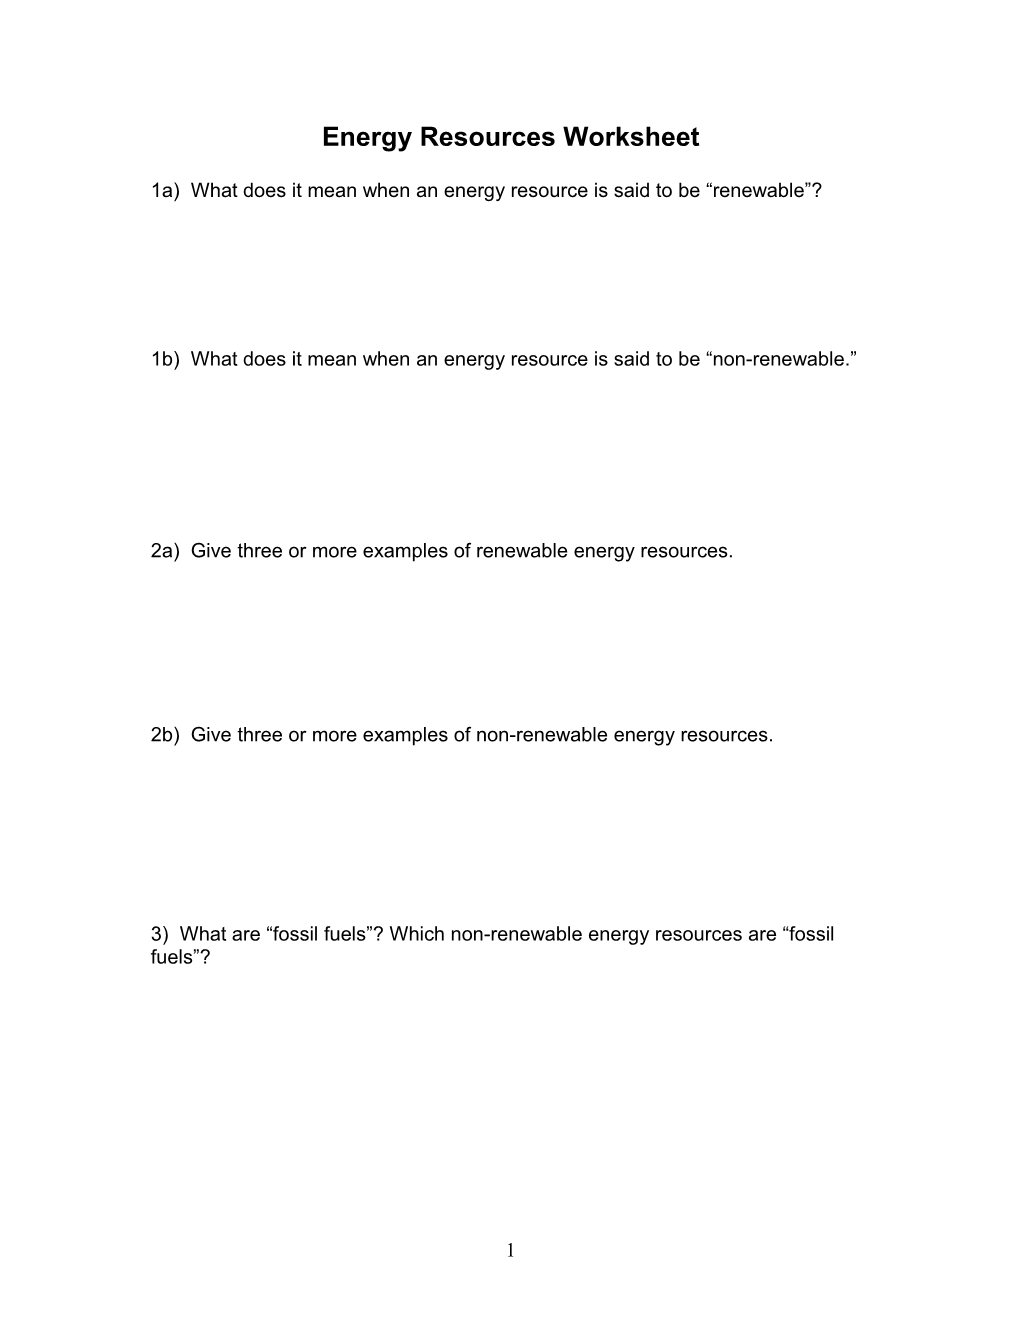 Student Worksheet on Energy Resources